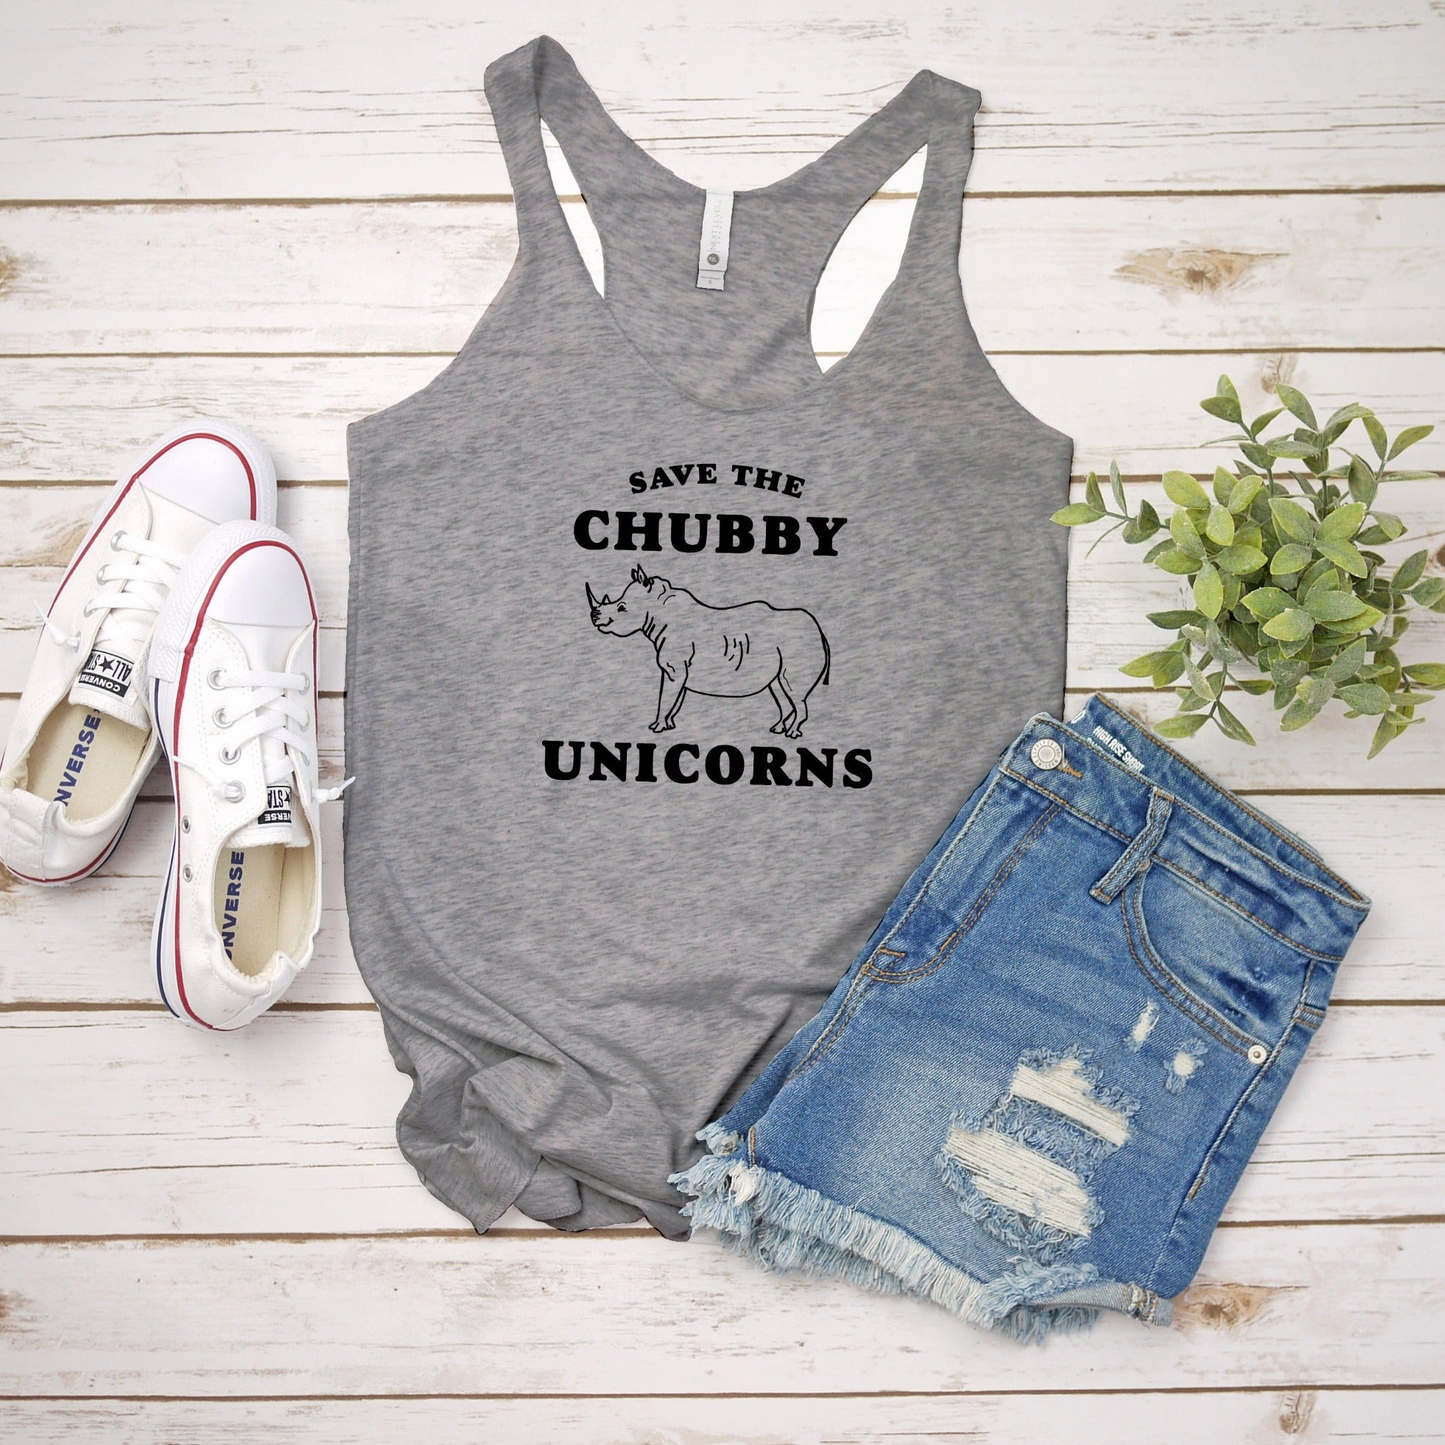 a tank top that says save the chubby unicorns